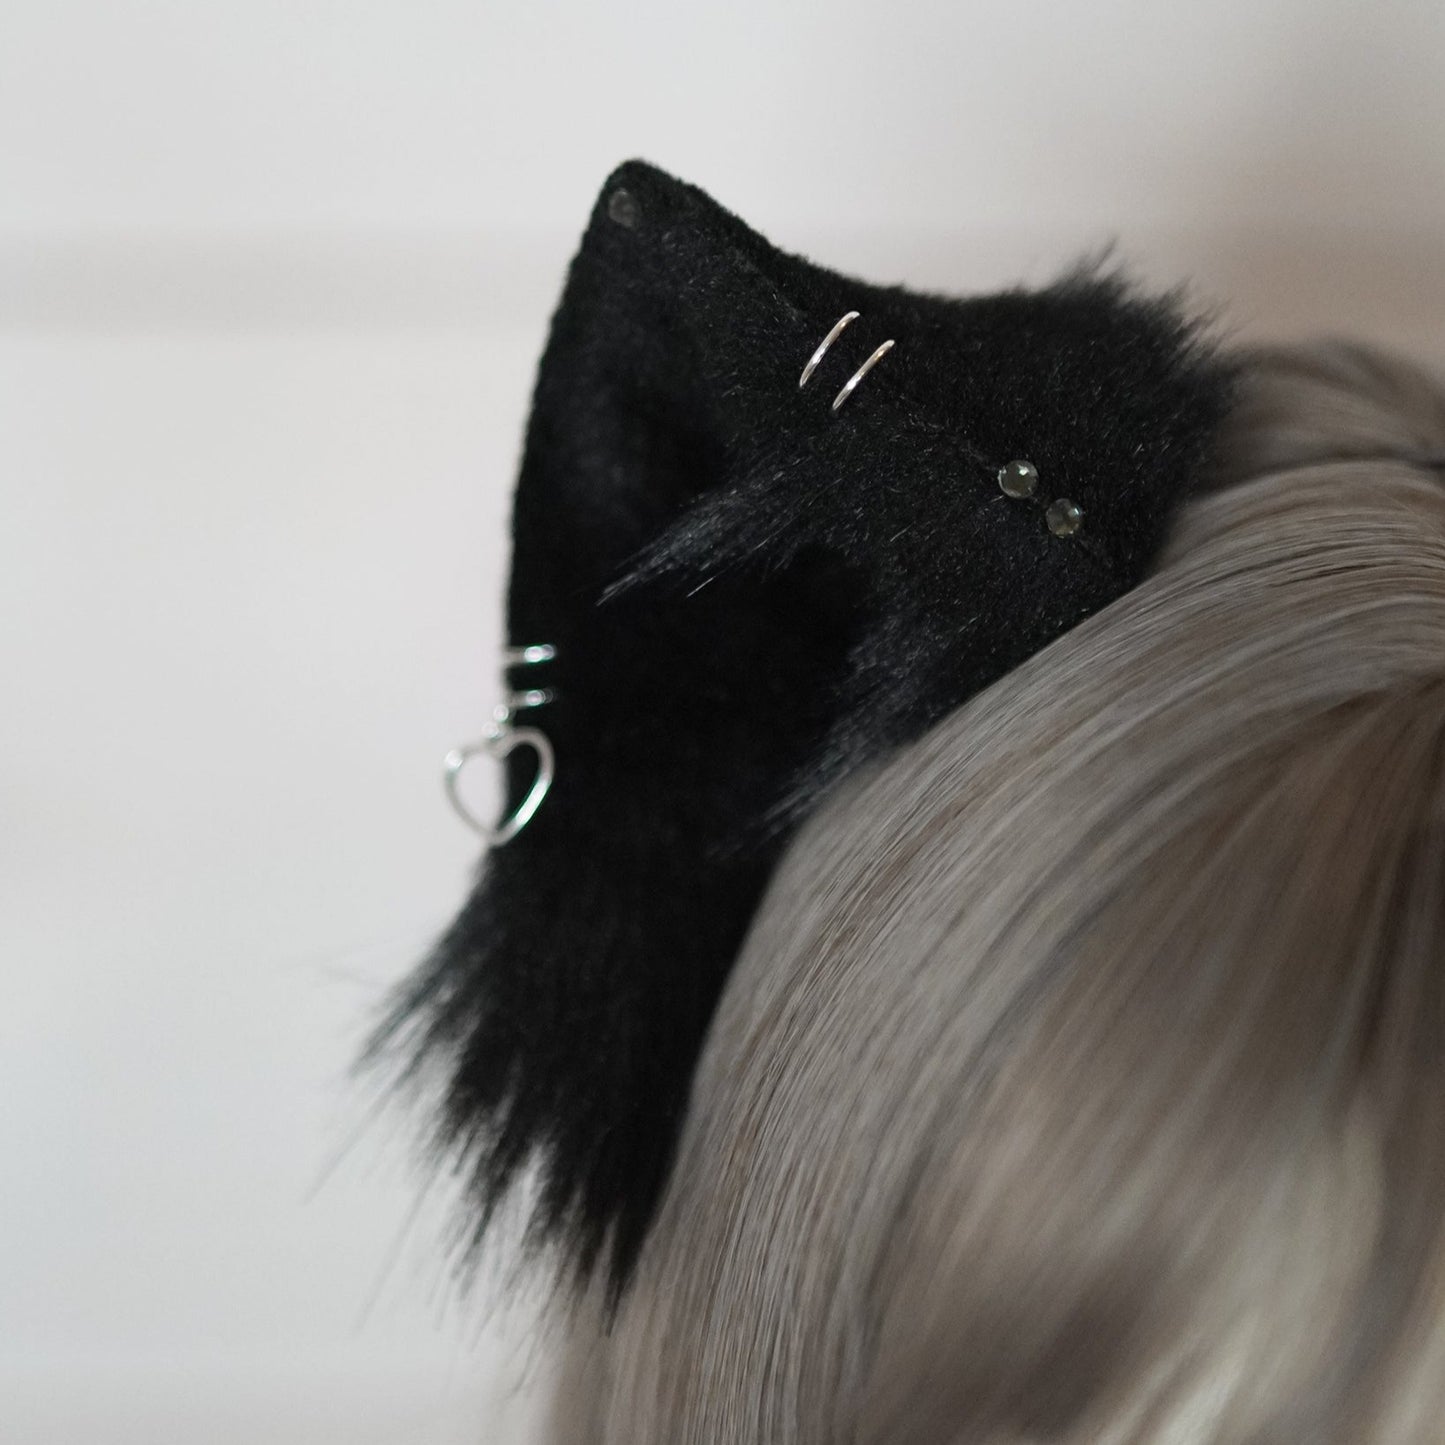 Cat Kitsune Ears in black with charms